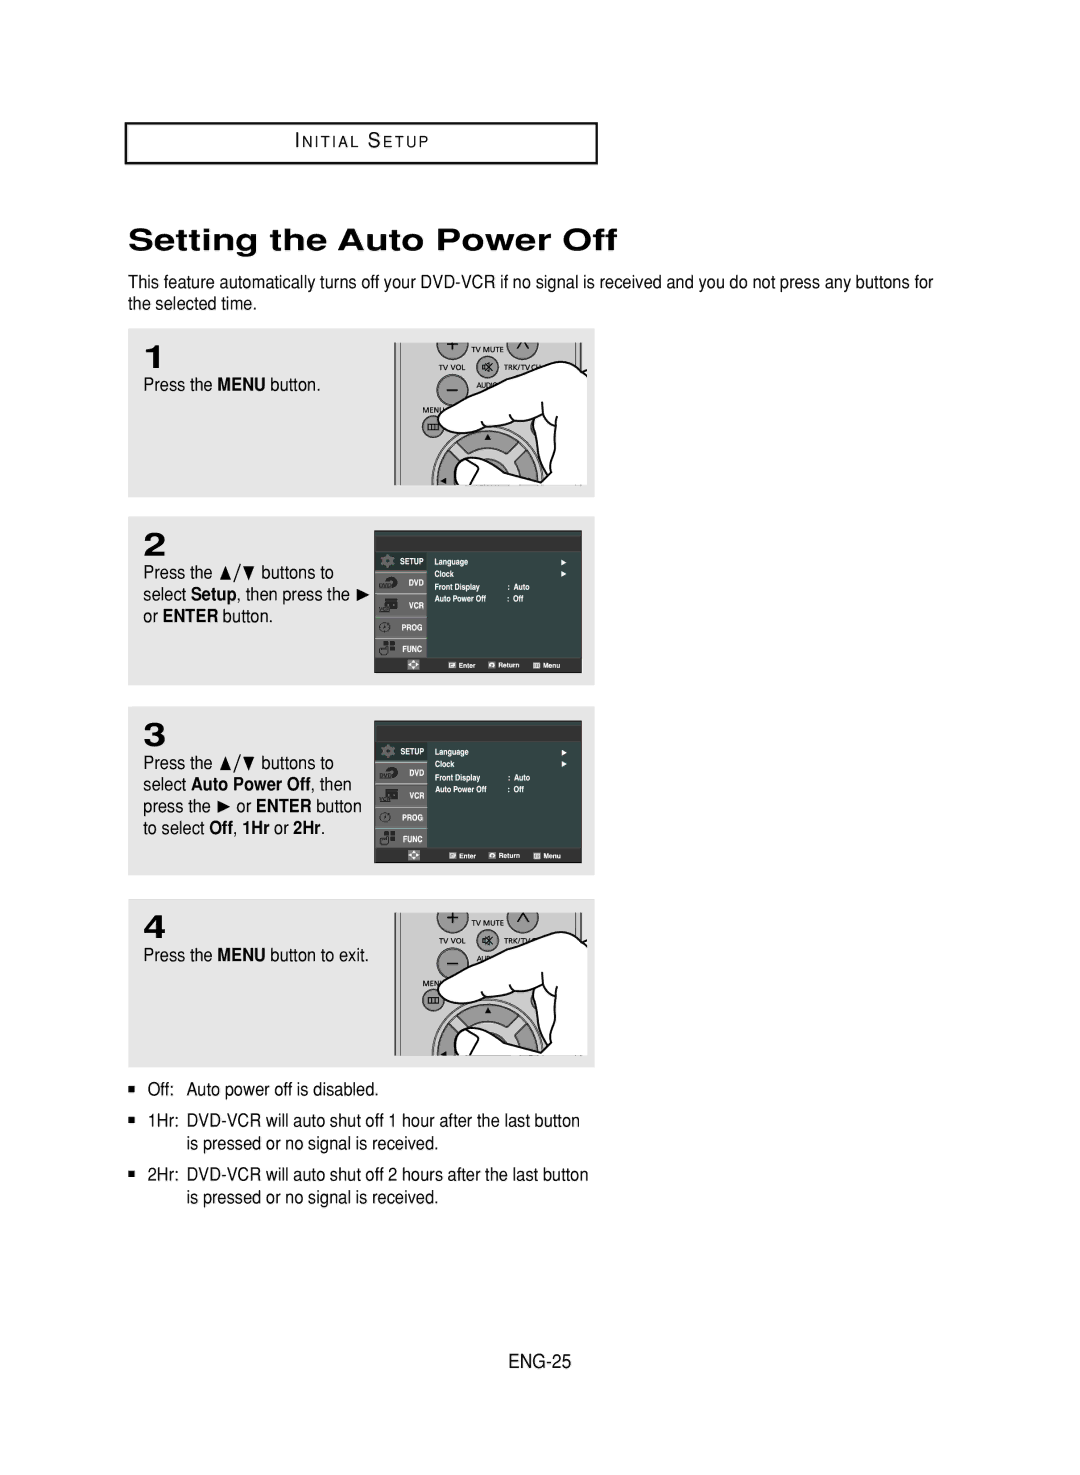 Samsung DVD-V9800 instruction manual Setting the Auto Power Off, ENG-25 